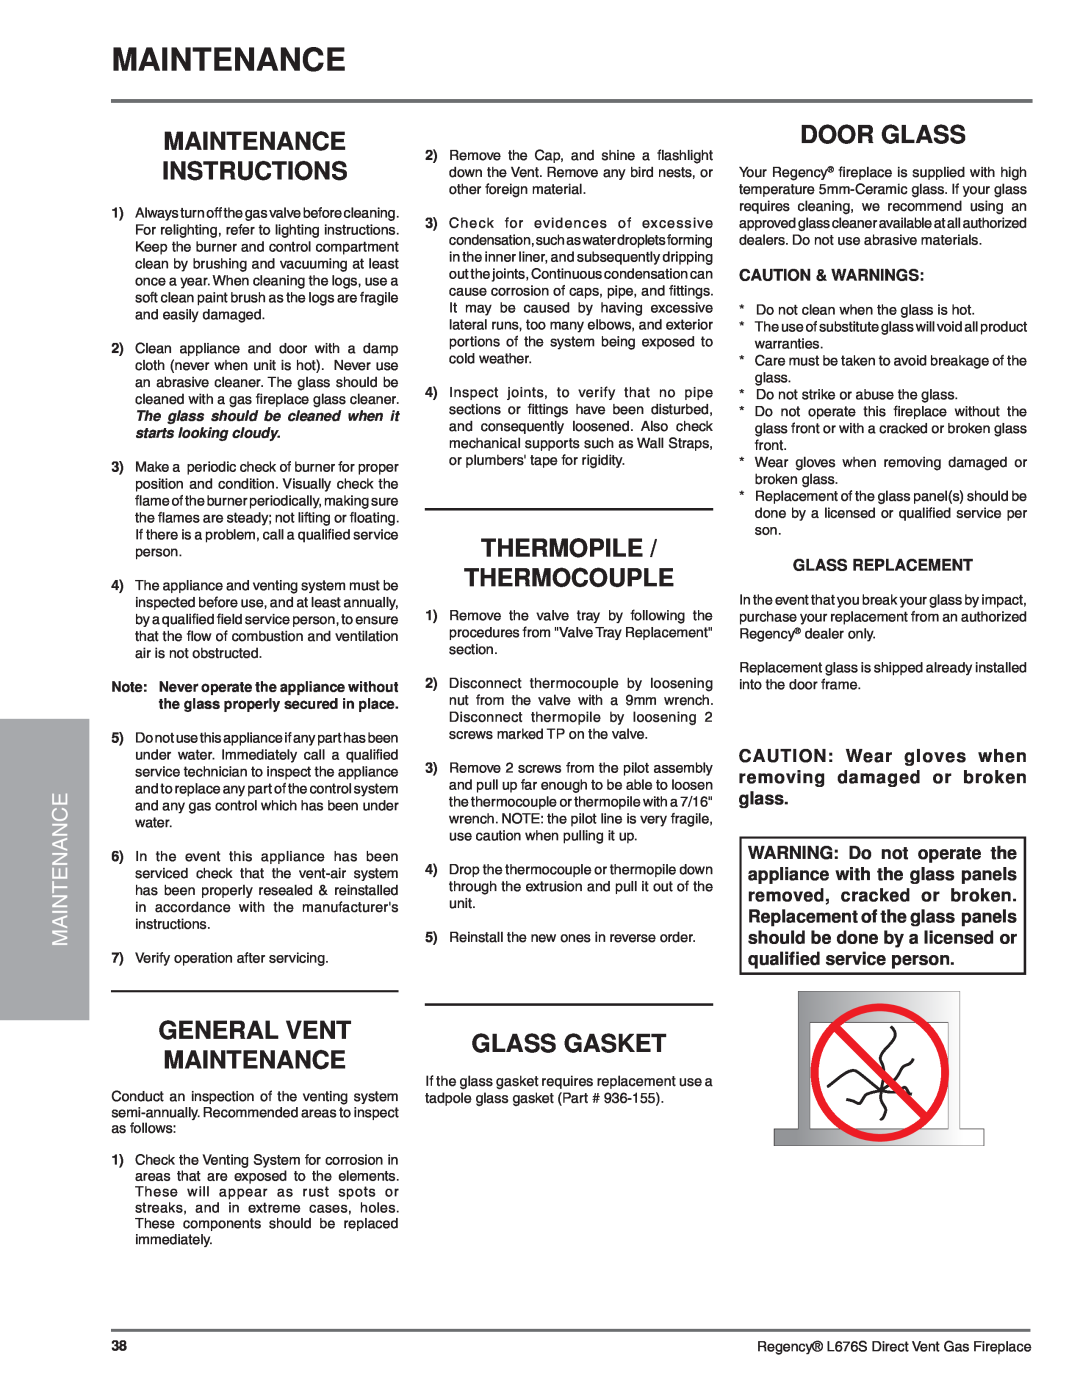 Regency L676S-NG1 Maintenance Instructions, Thermopile Thermocouple, Door Glass, General Vent Maintenance 